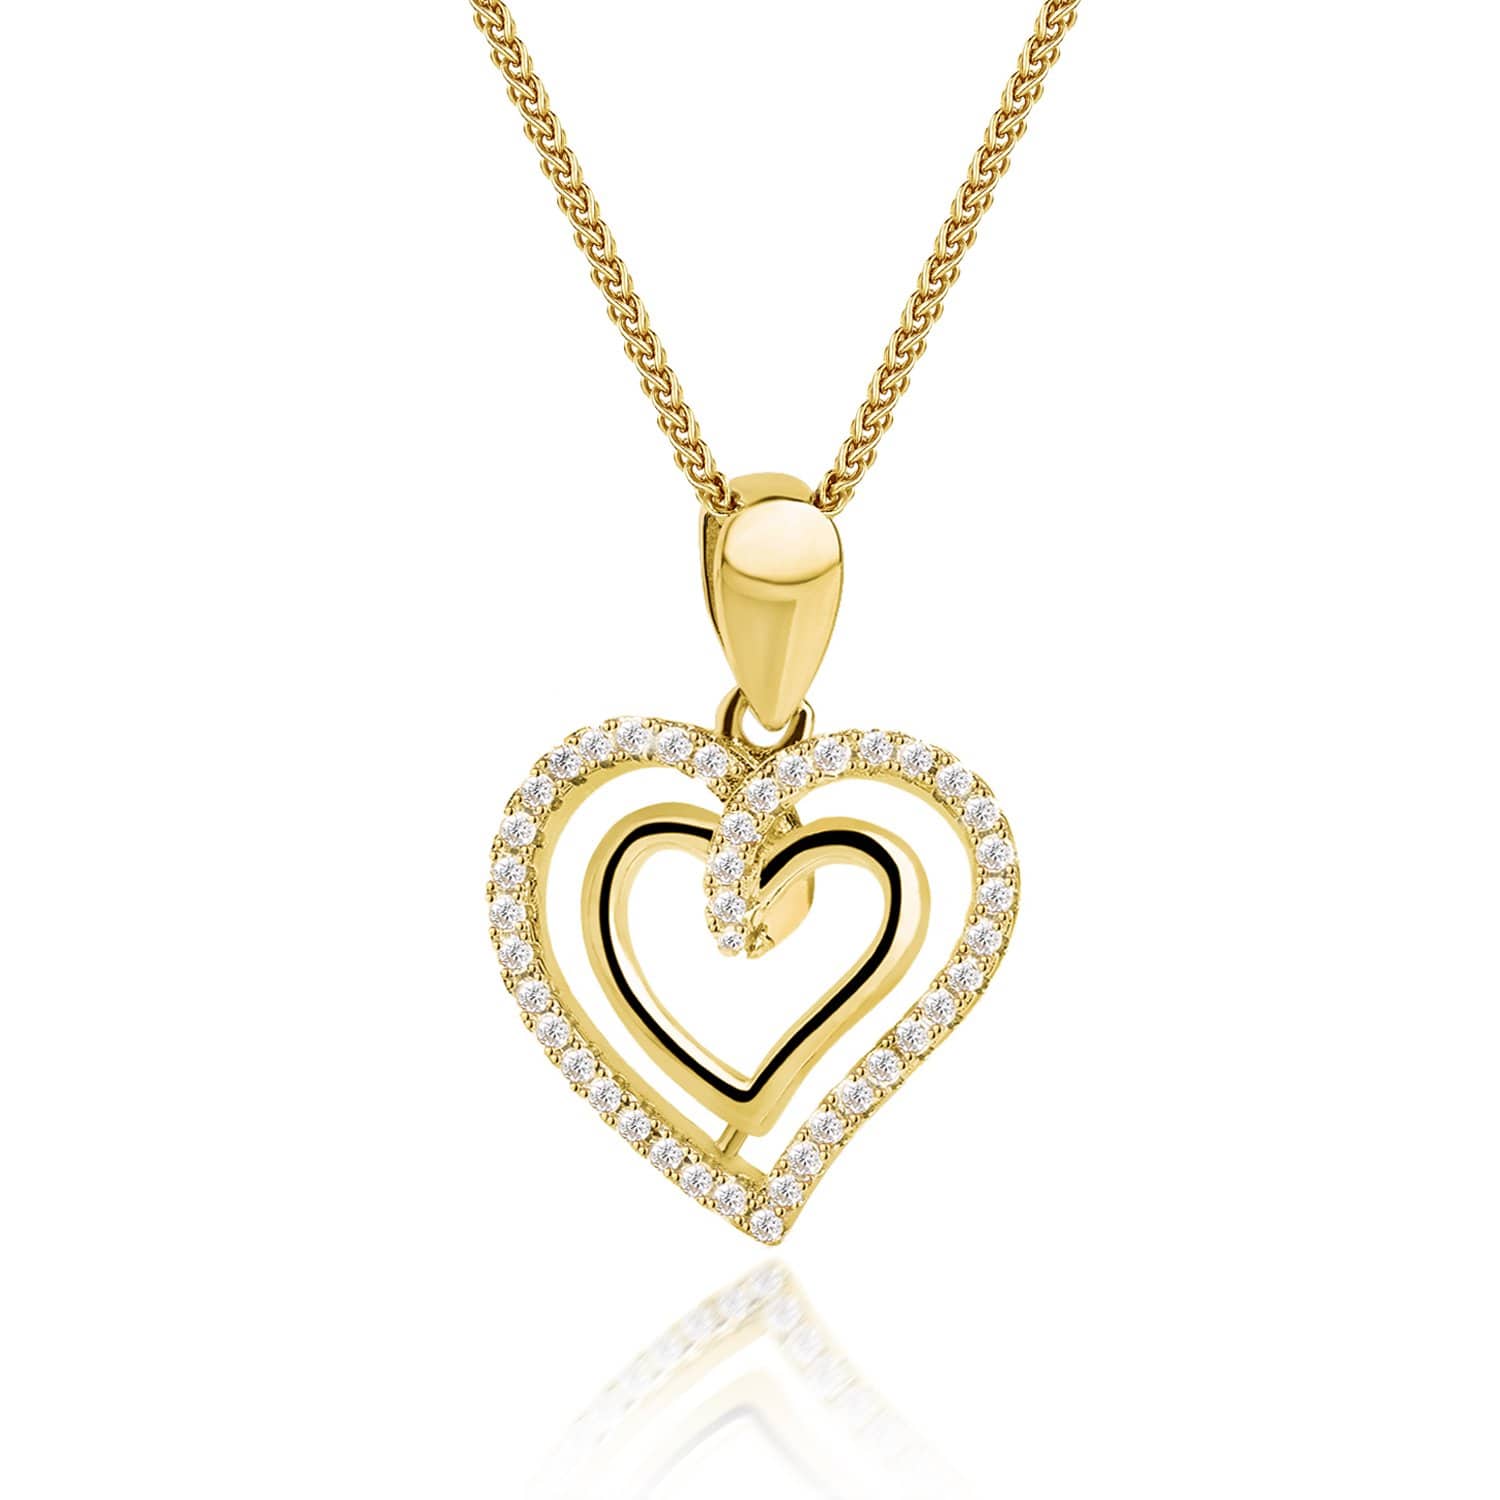 LynoraJewellery ETERNITY HEART PENDANT GOLD PLATED STERLING SILVER